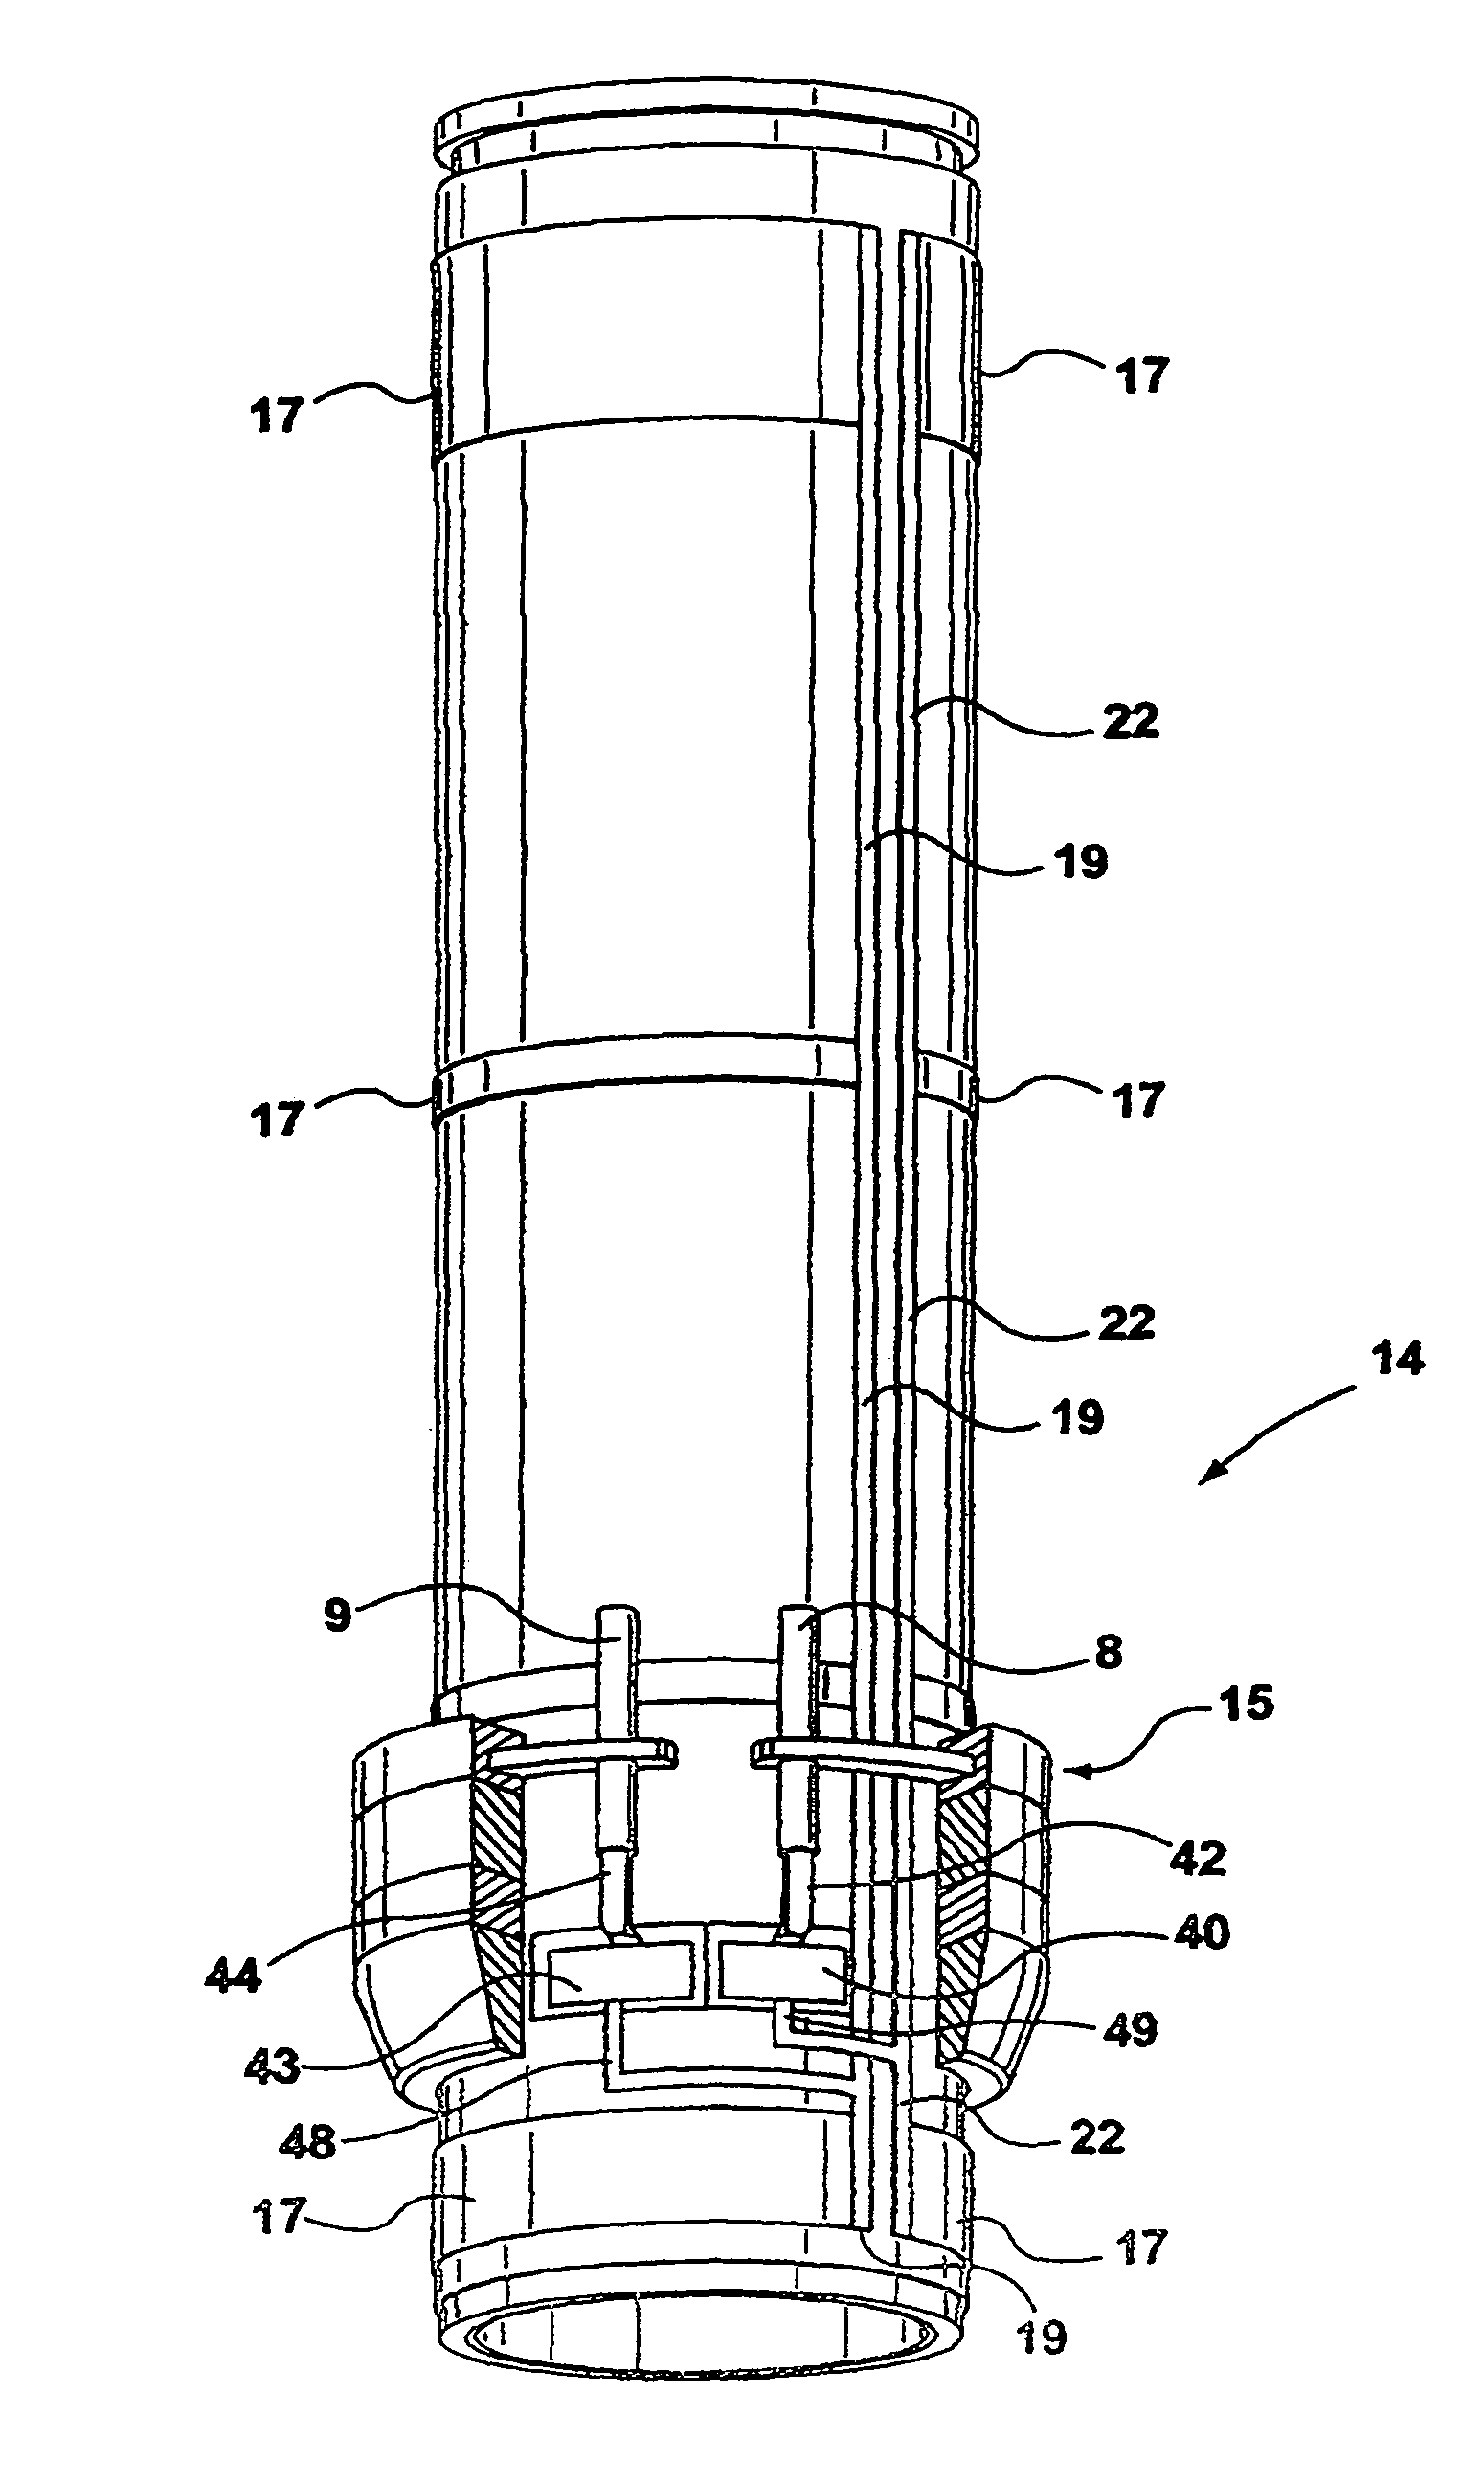 Electrical connector assembly for an arcuate surface in a high temperature environment and an associated method of use